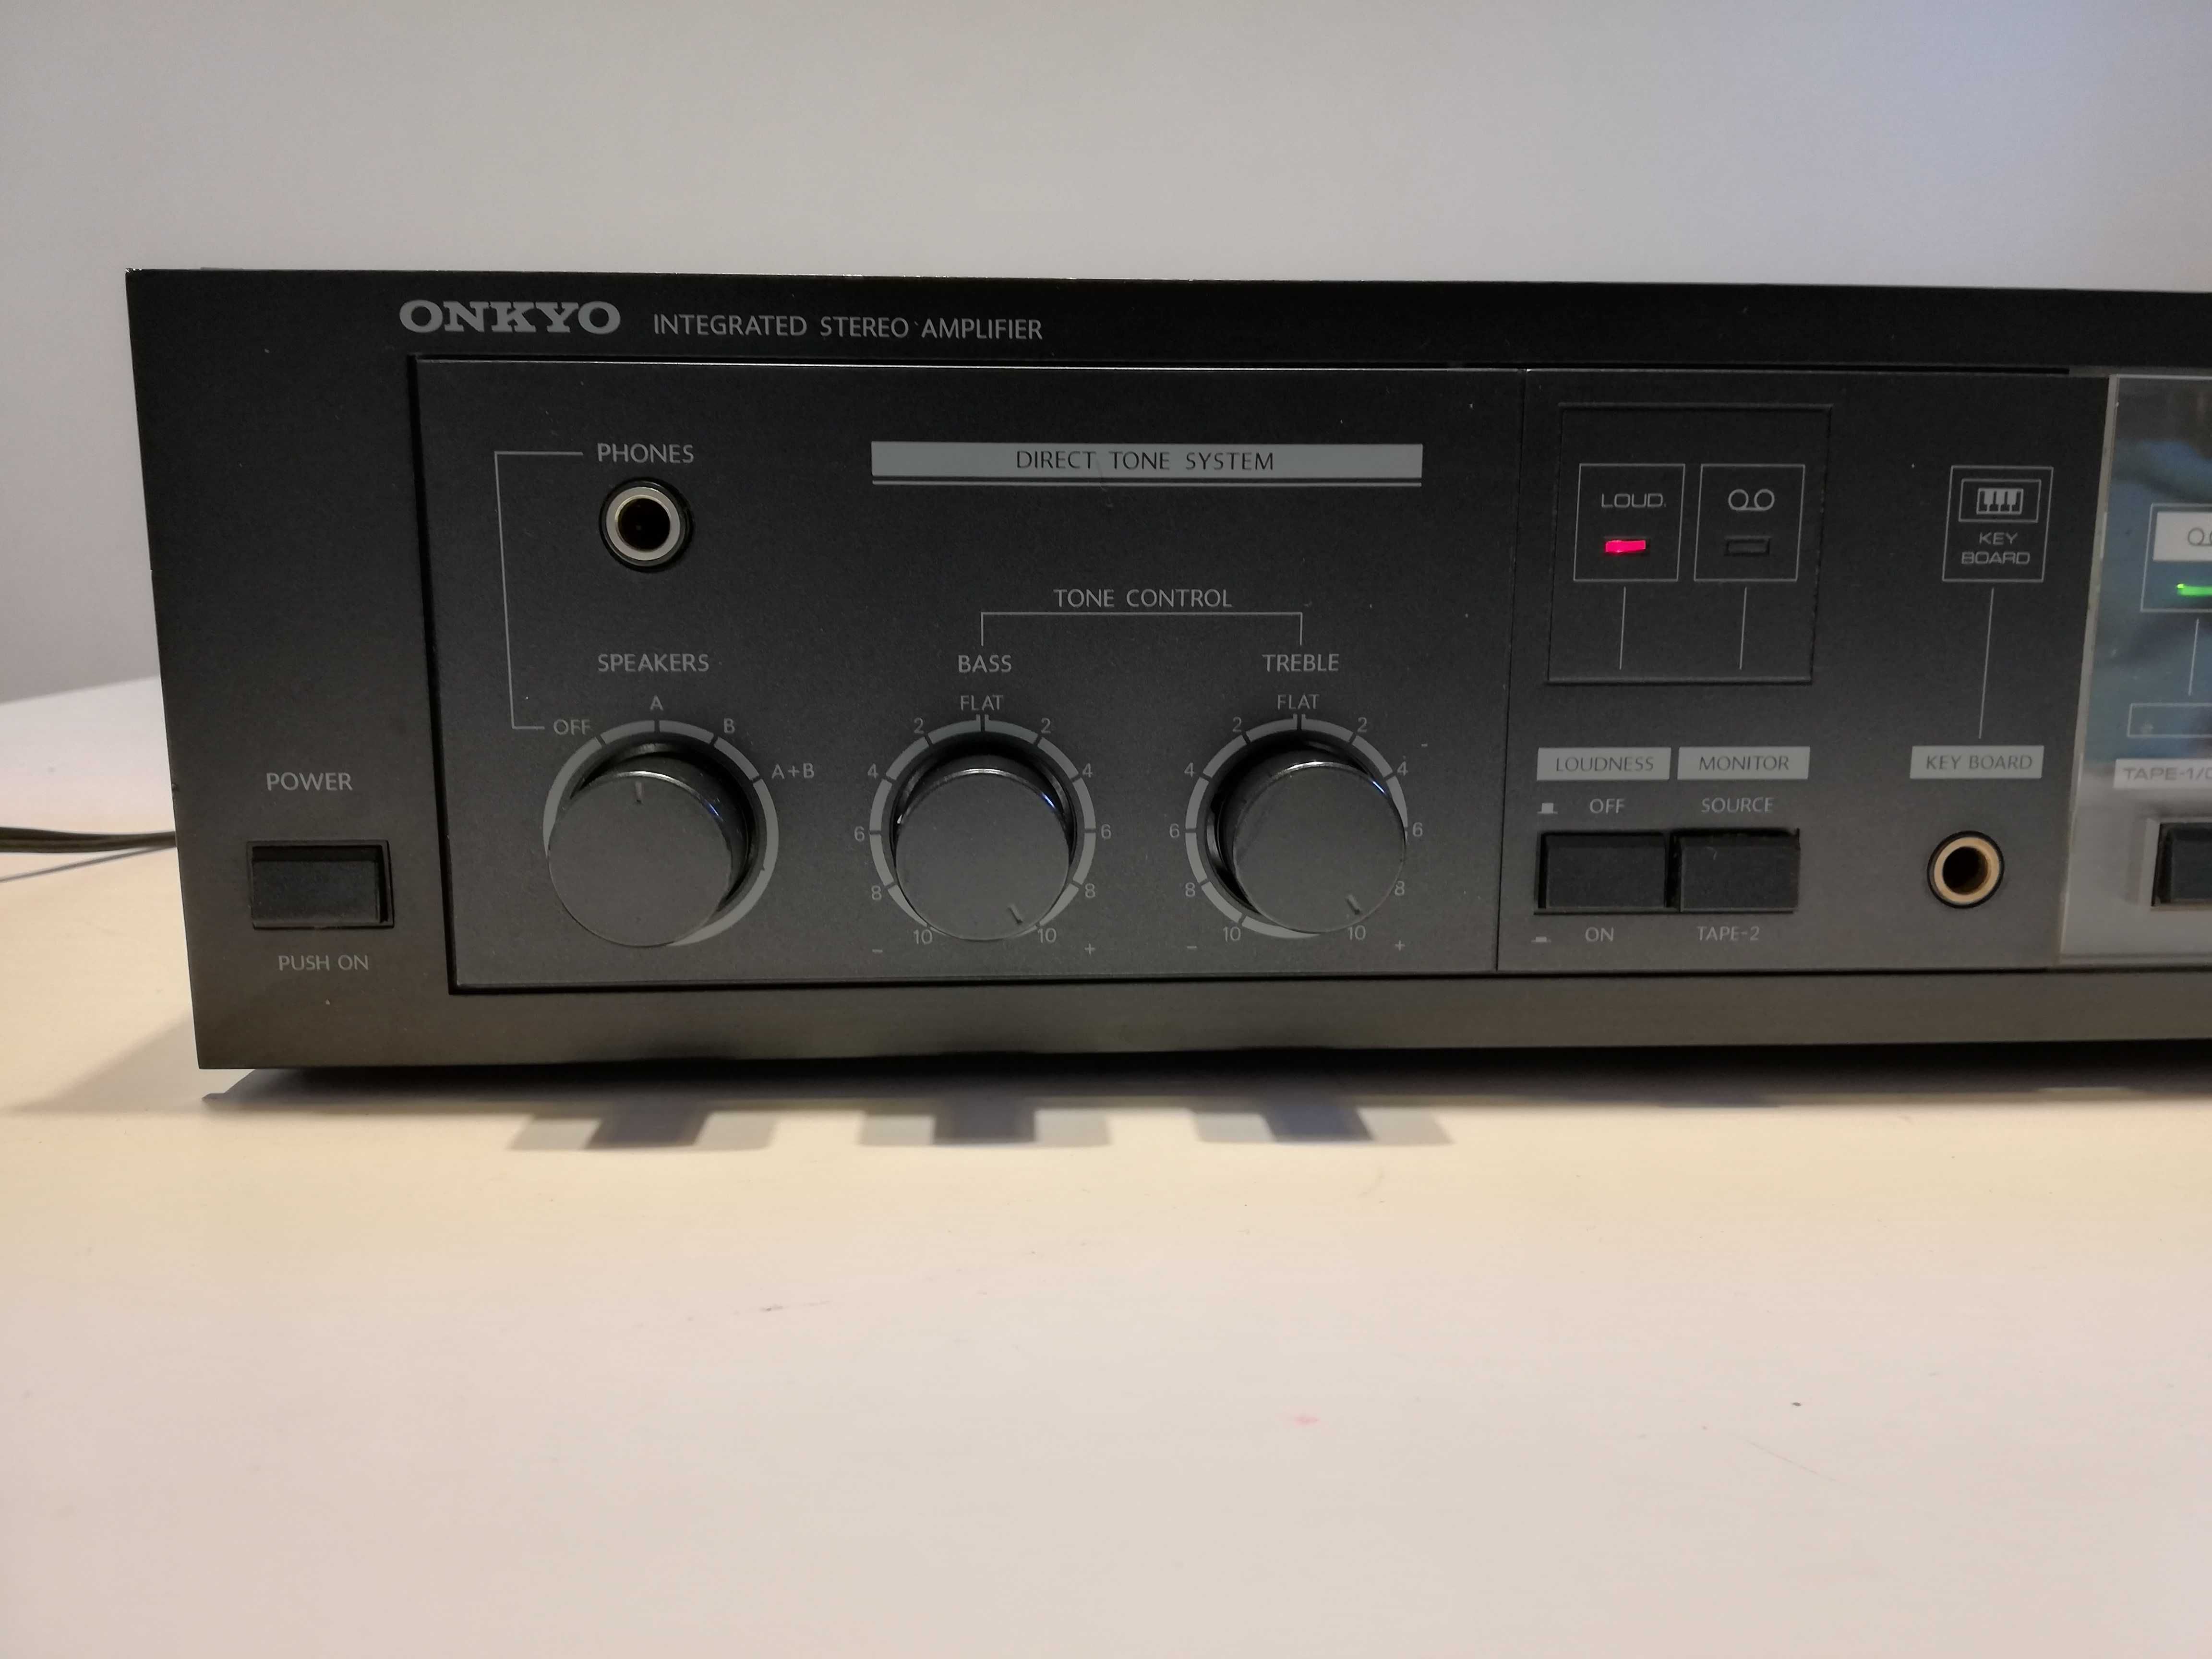 Amplificator Stereo ONKYO model A-300 - Vintage/Impecabil/made Japan